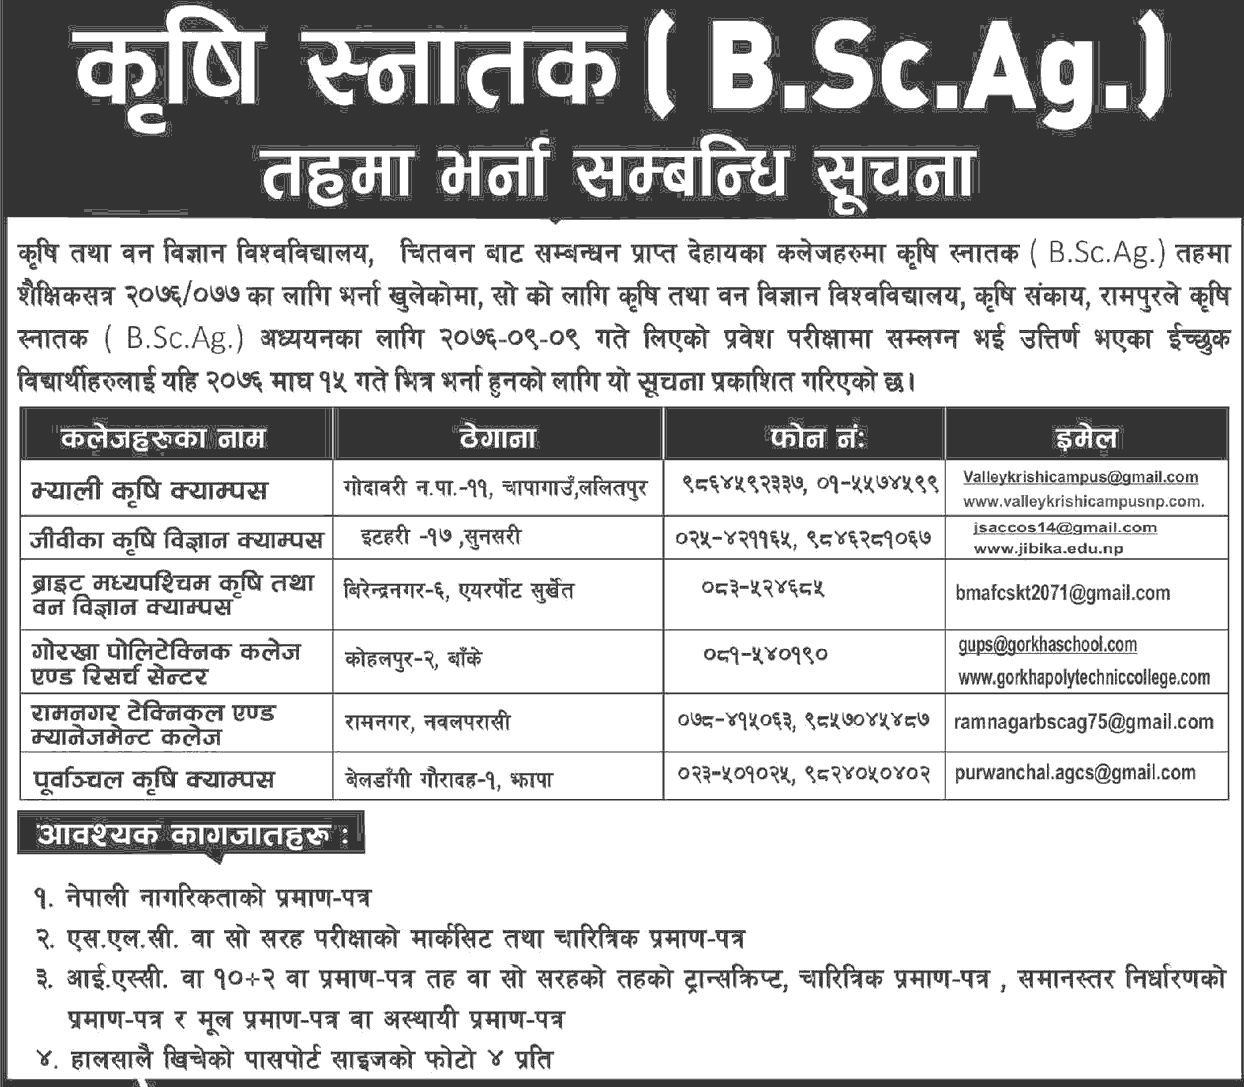 B.Sc.Ag. Admission Open in Various Colleges